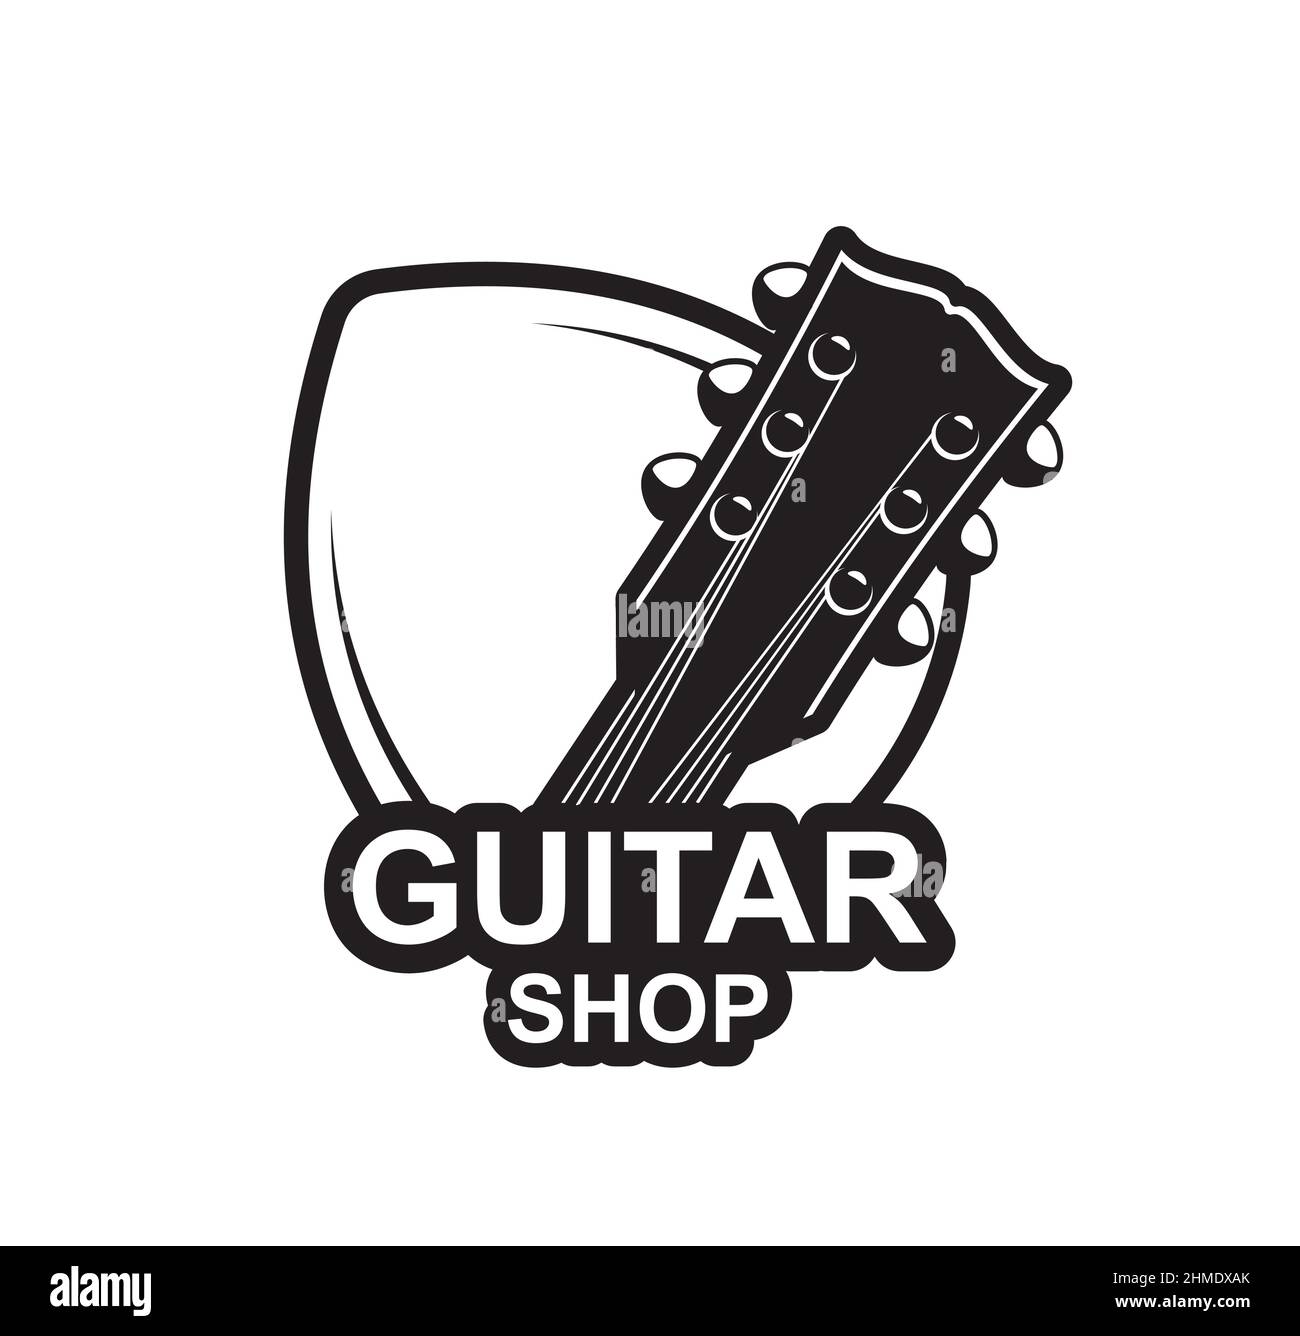 Guitar shop icon, acoustic musical guitar vector emblem for concert or band instruments. Musician instruments store with rock or pop band guitars, bas Stock Vector